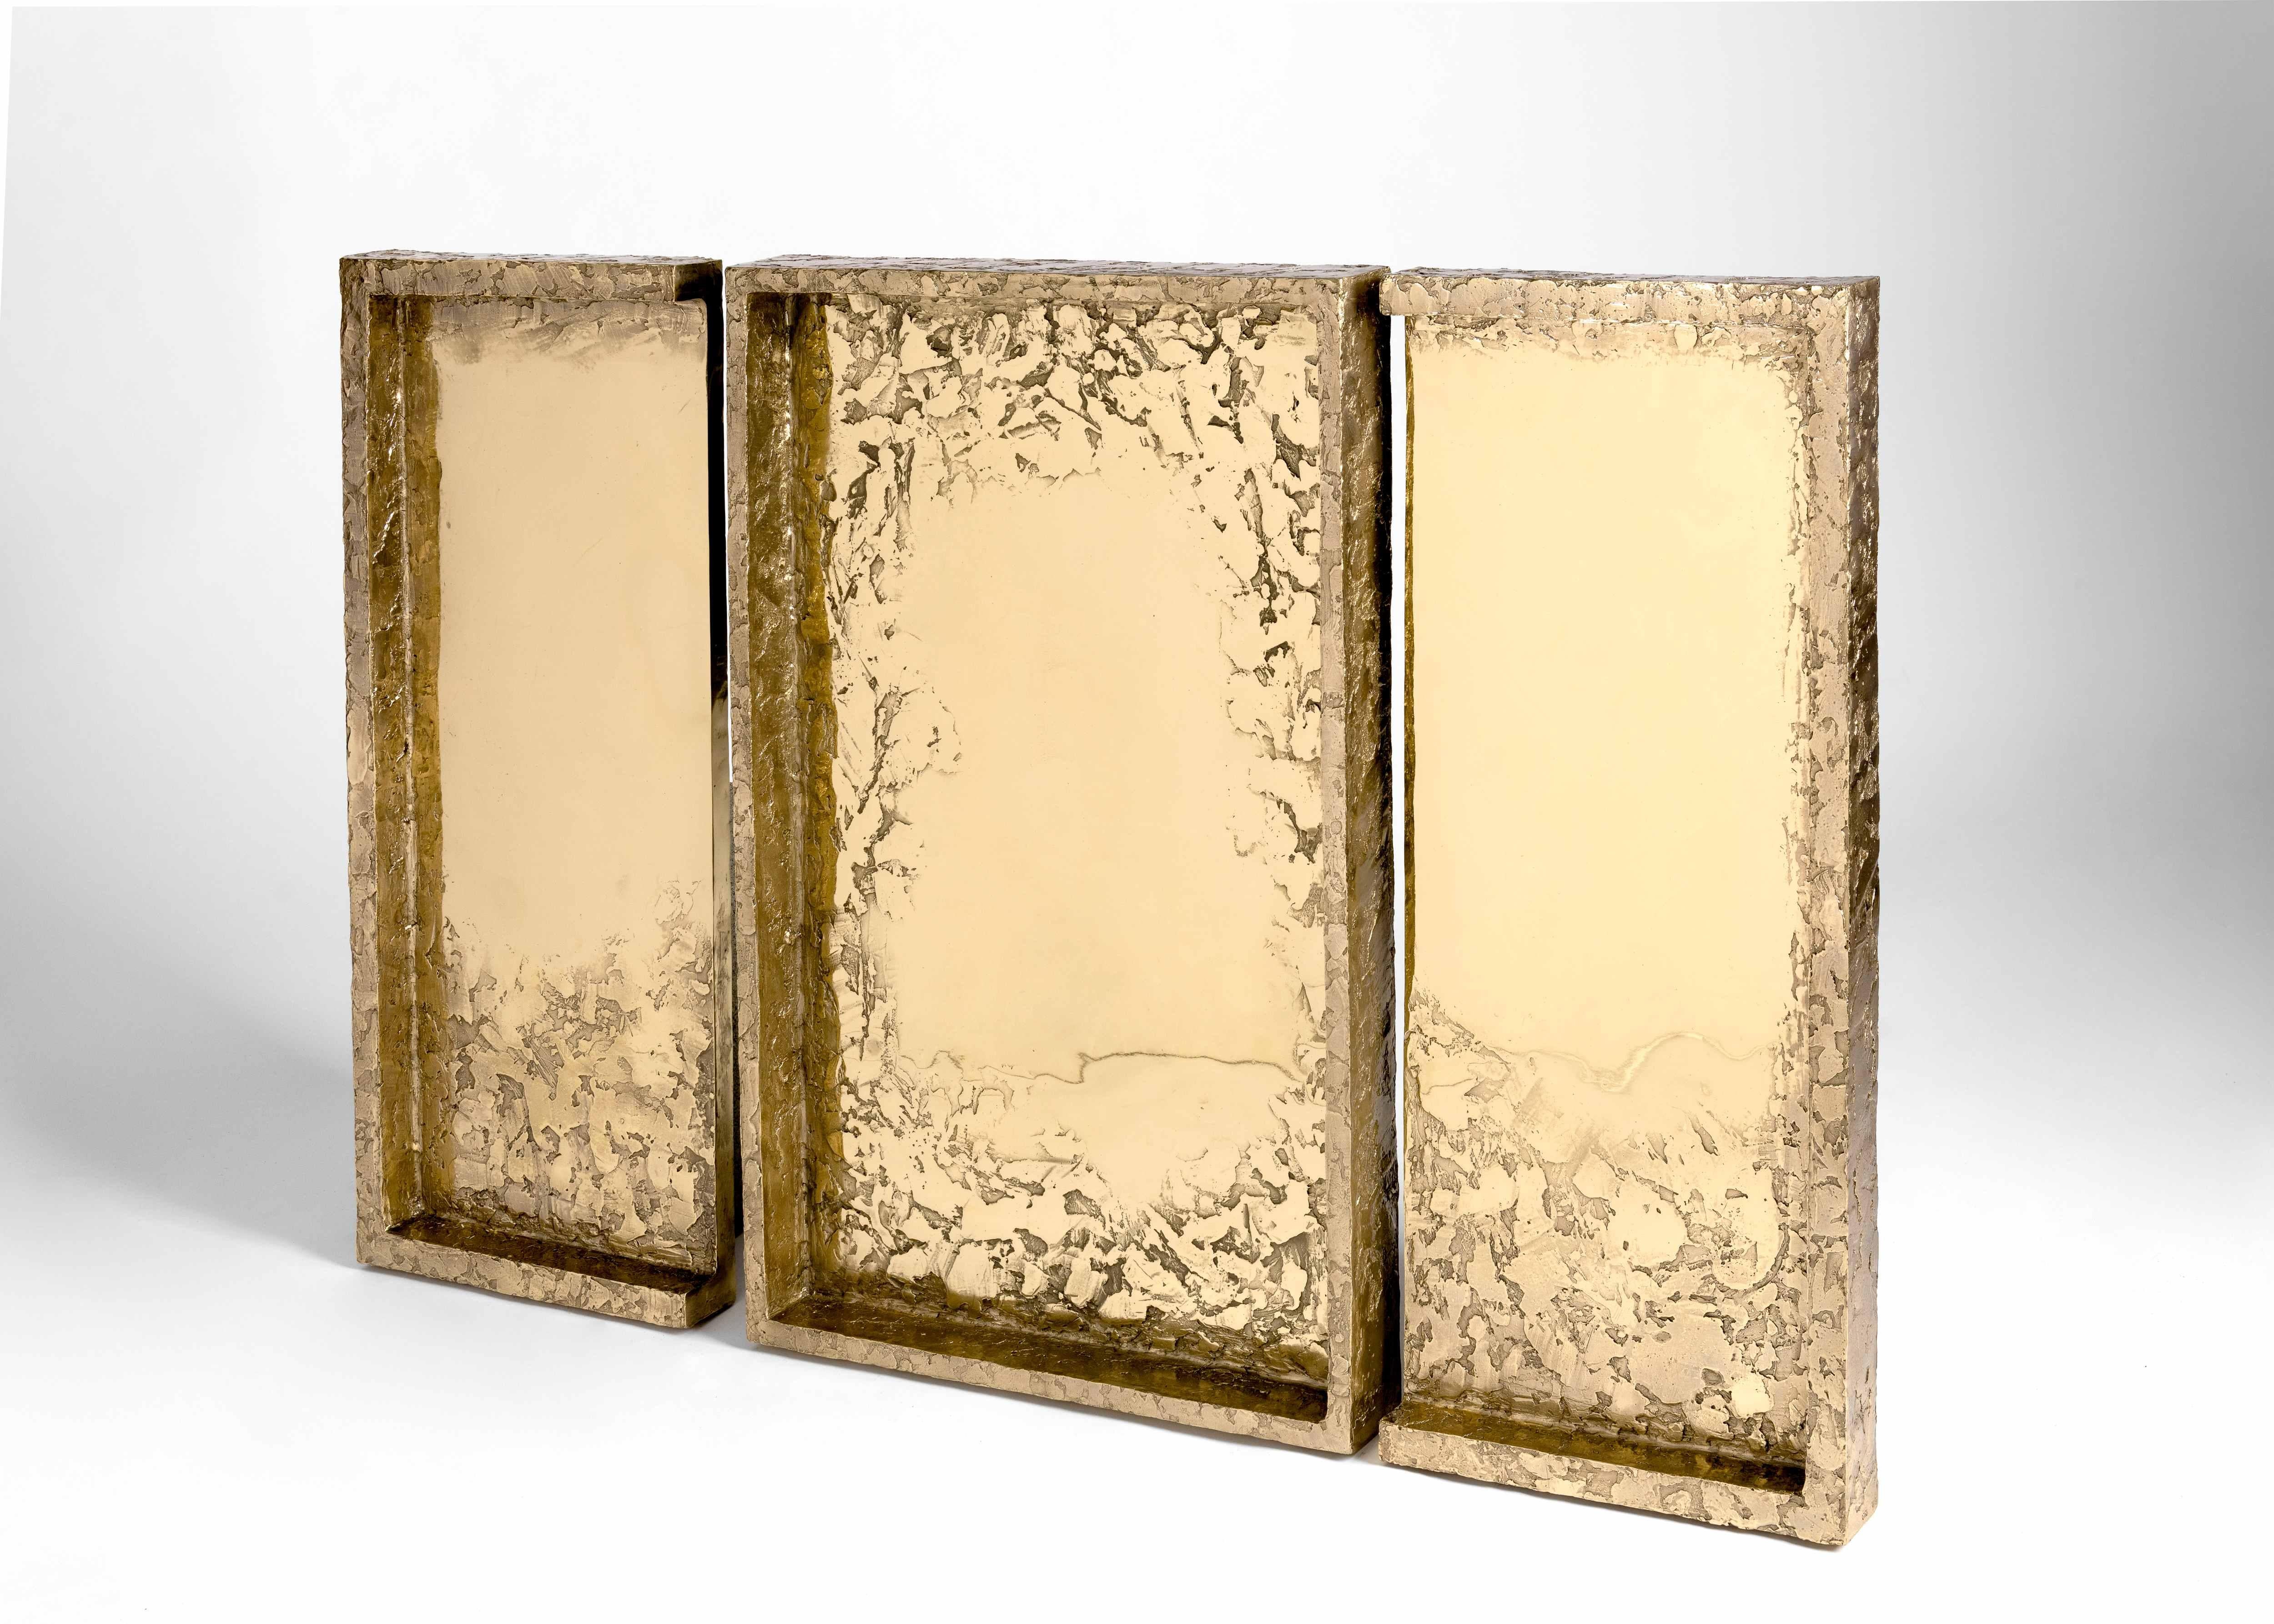 A triptych of wall-mounted sculptural mirrors composed of bronze -- highly polished at the panels' centers and rough, like baked earth, about their frames. This exquisite installation was designed and executed by the French duo Garnier & Linker,